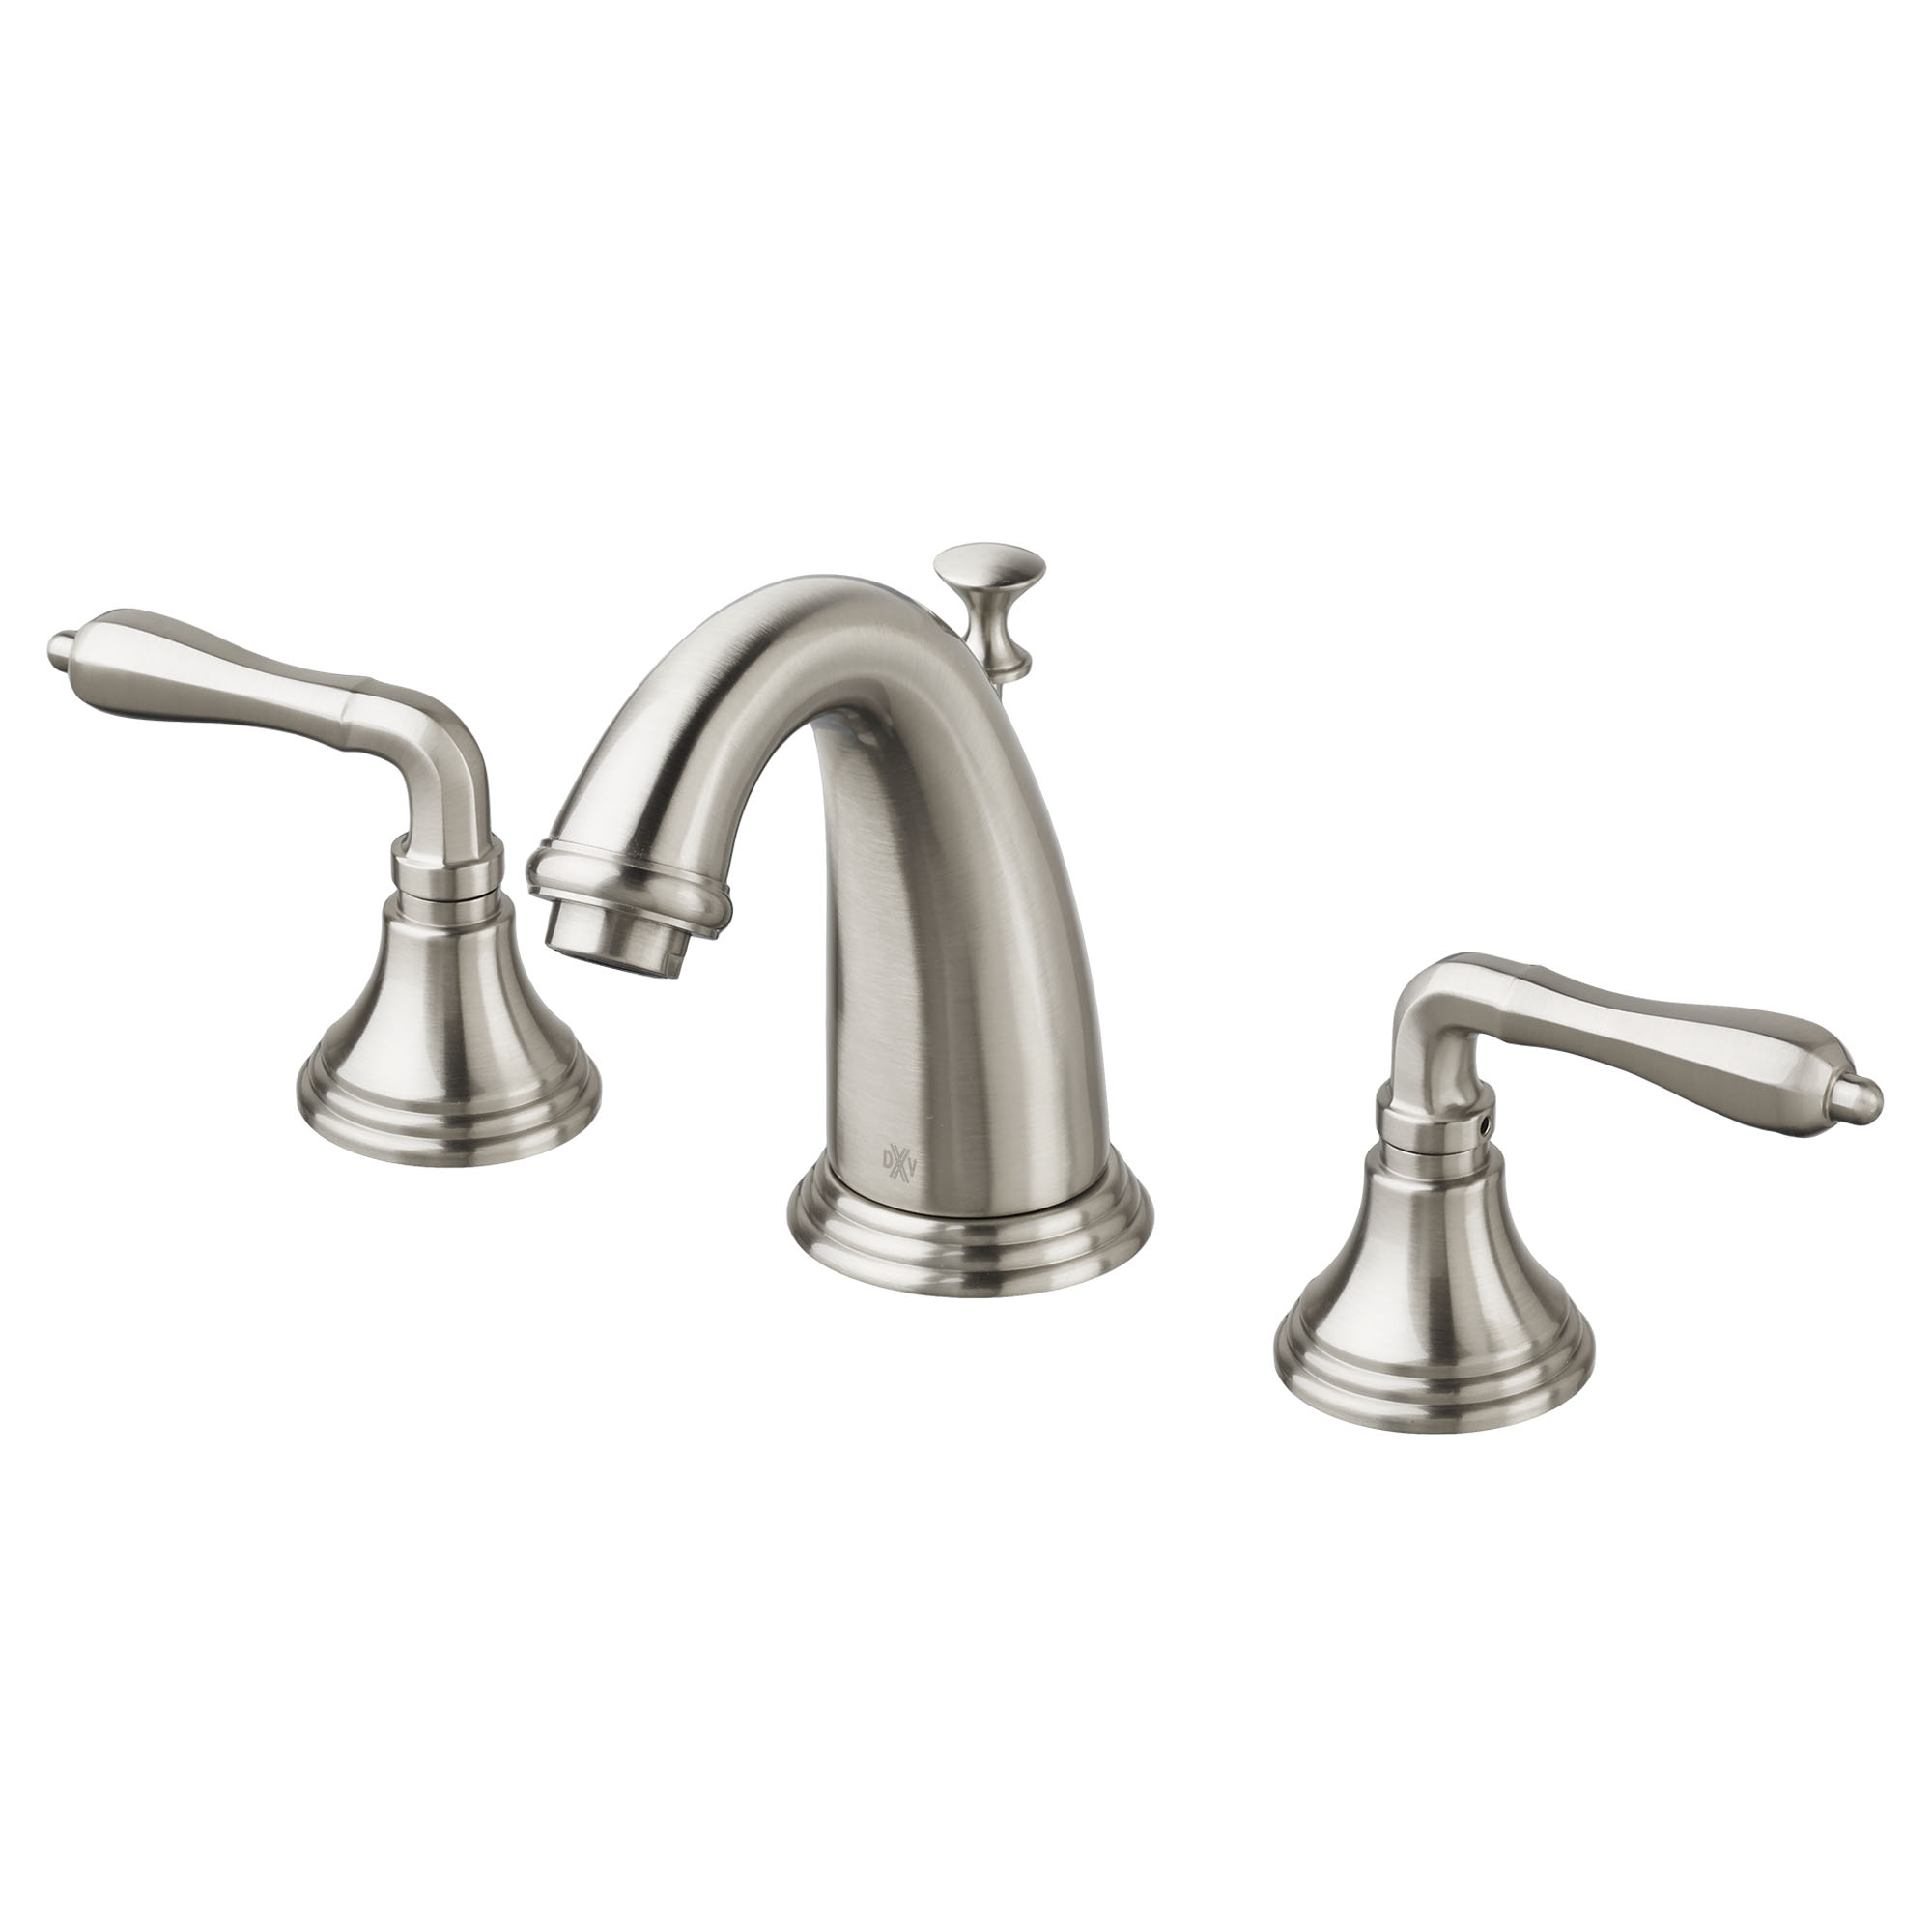 Widespread Lavatory Faucet with Lever Handles